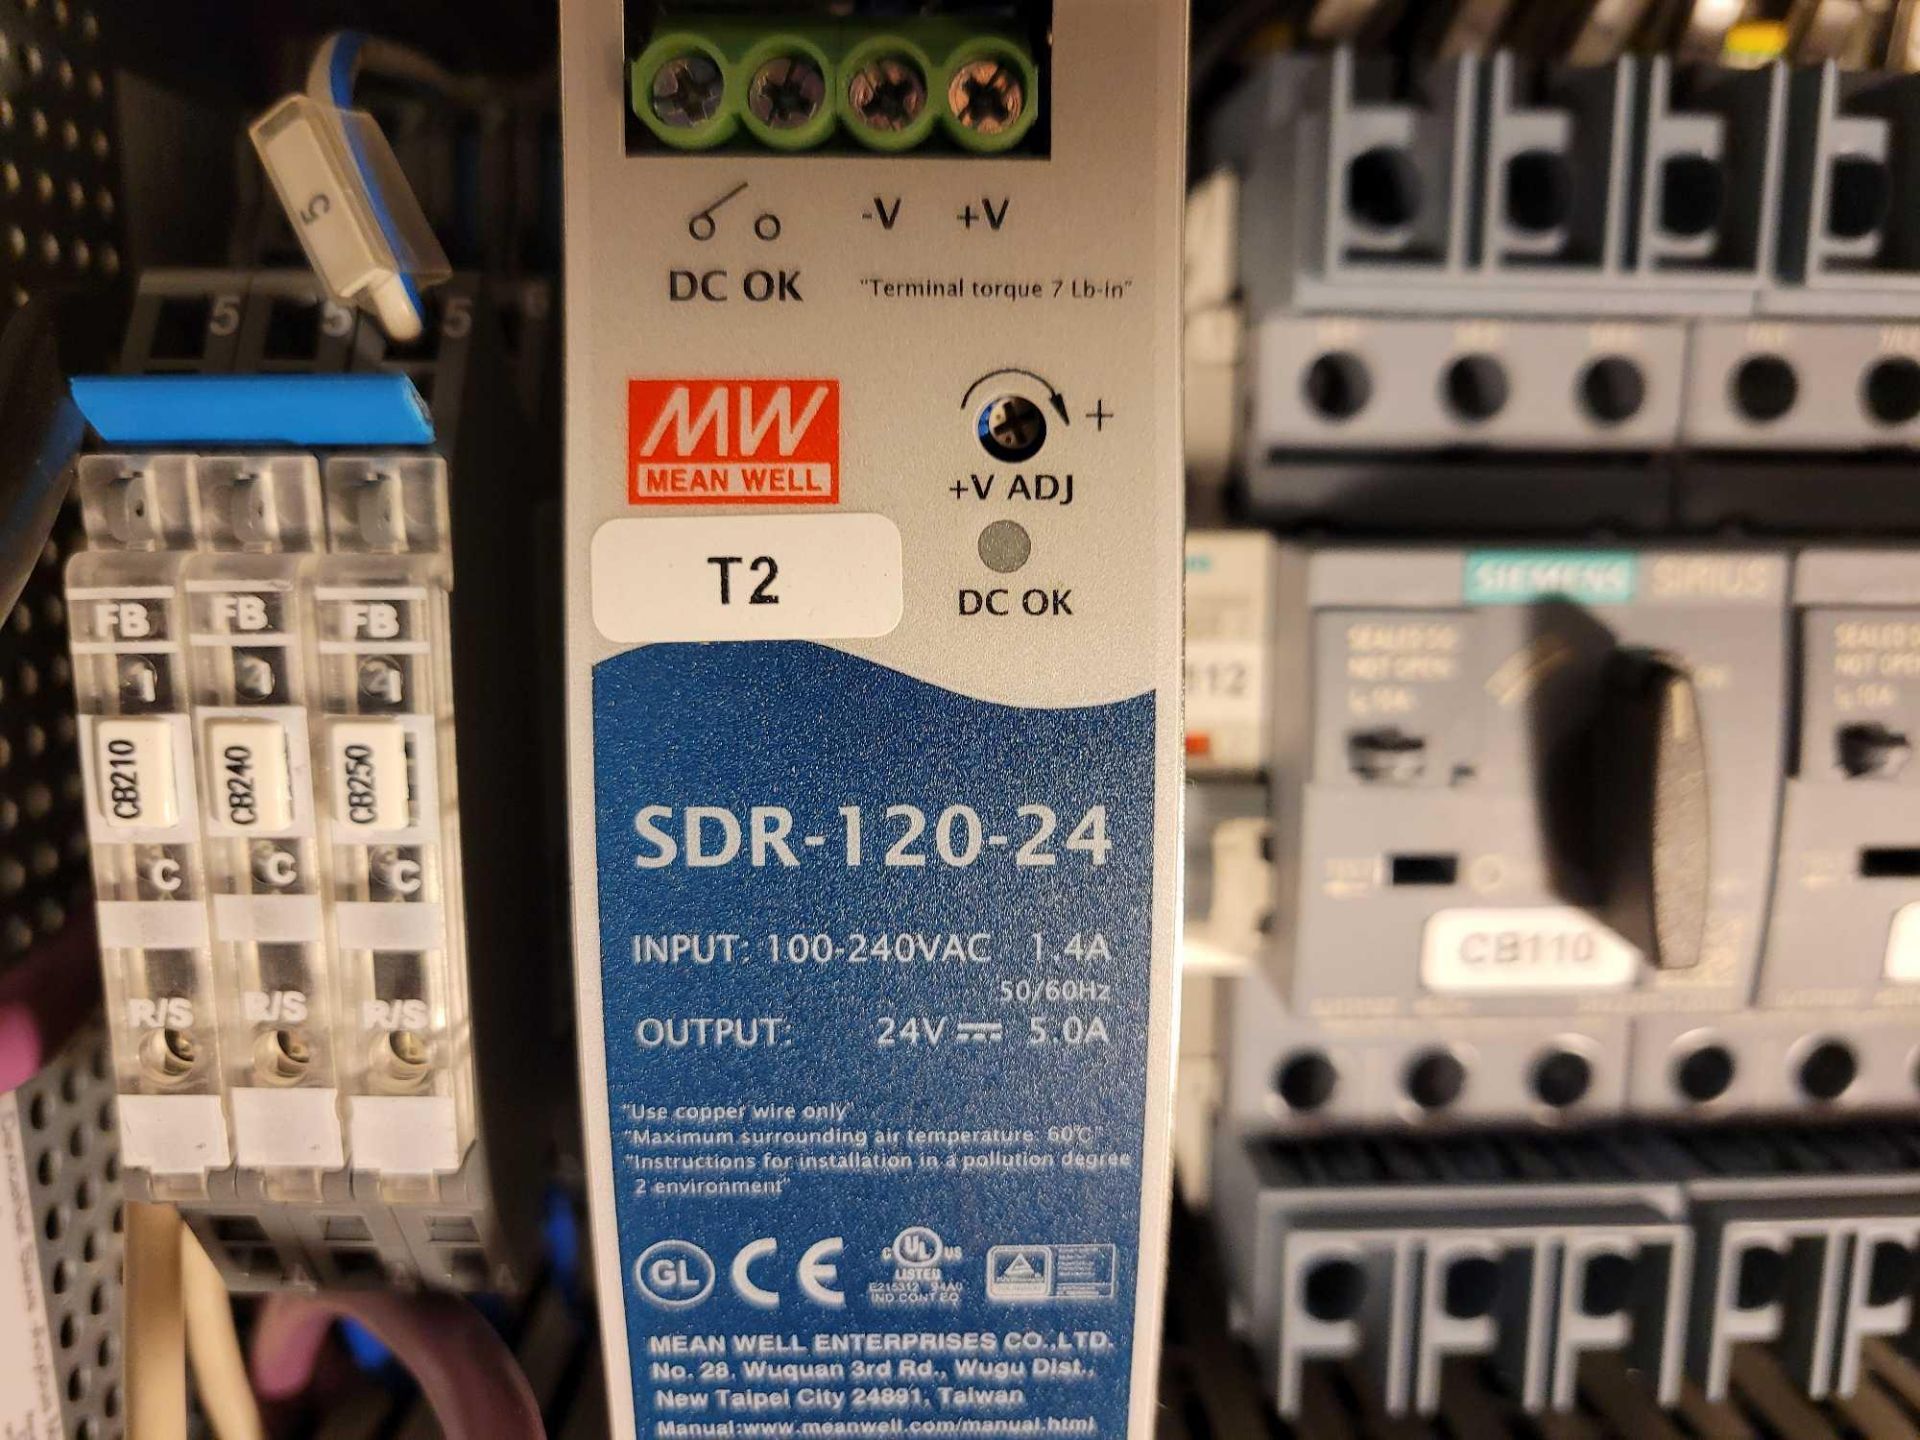 SCA TPC 6000-05, SCA SYS6000-15, MEANWELL SDR-120-24, [2] SIEMENS 3RV2711-1JD10, ABB 2CSF204101R1250 - Image 8 of 11